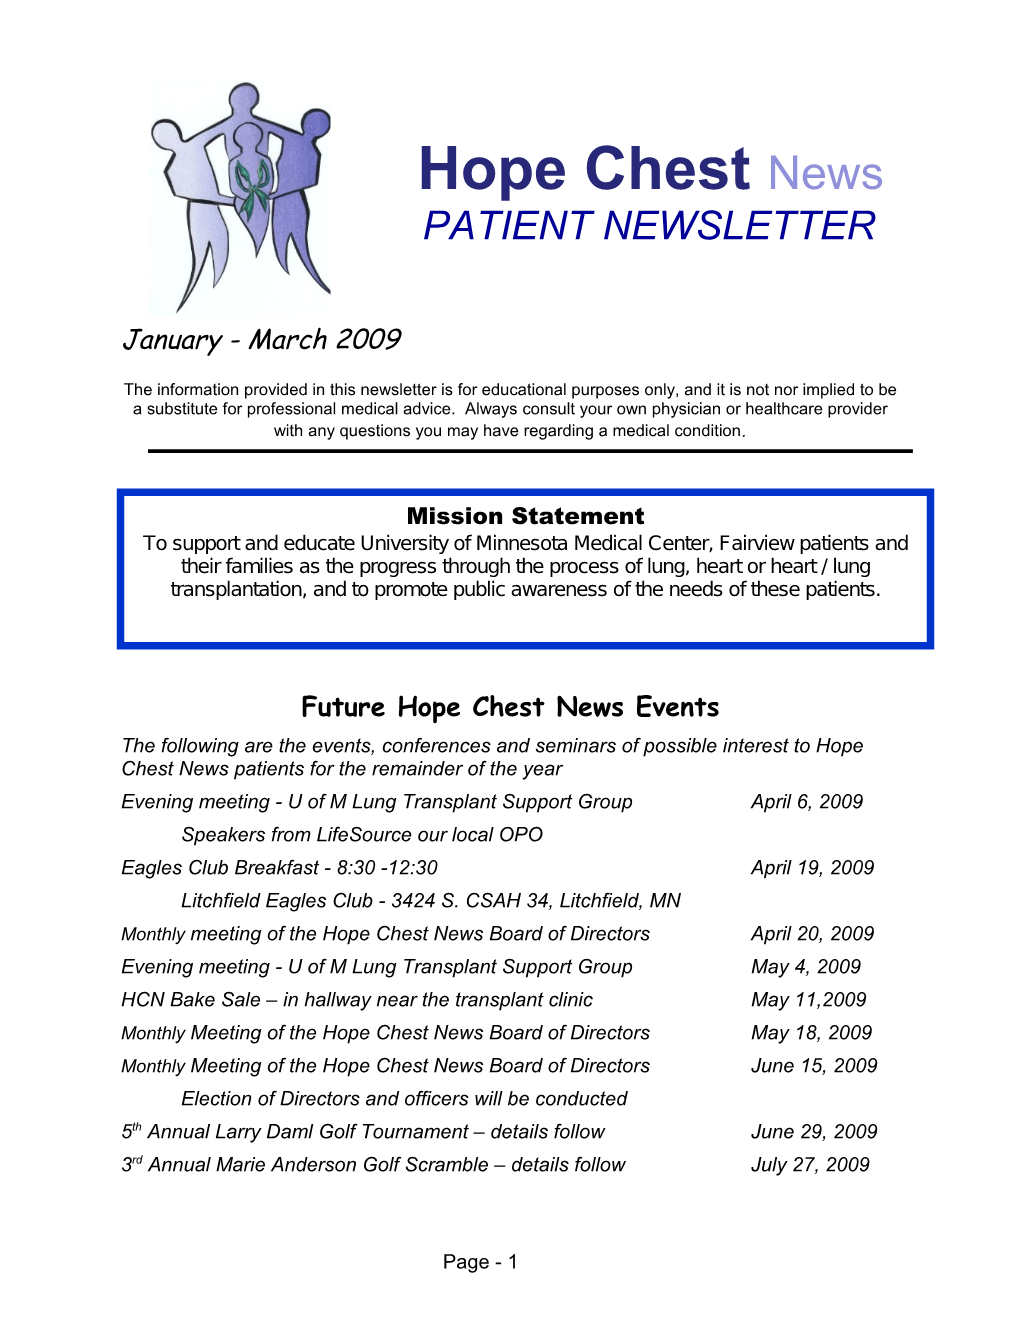 Future Hope Chest News Events